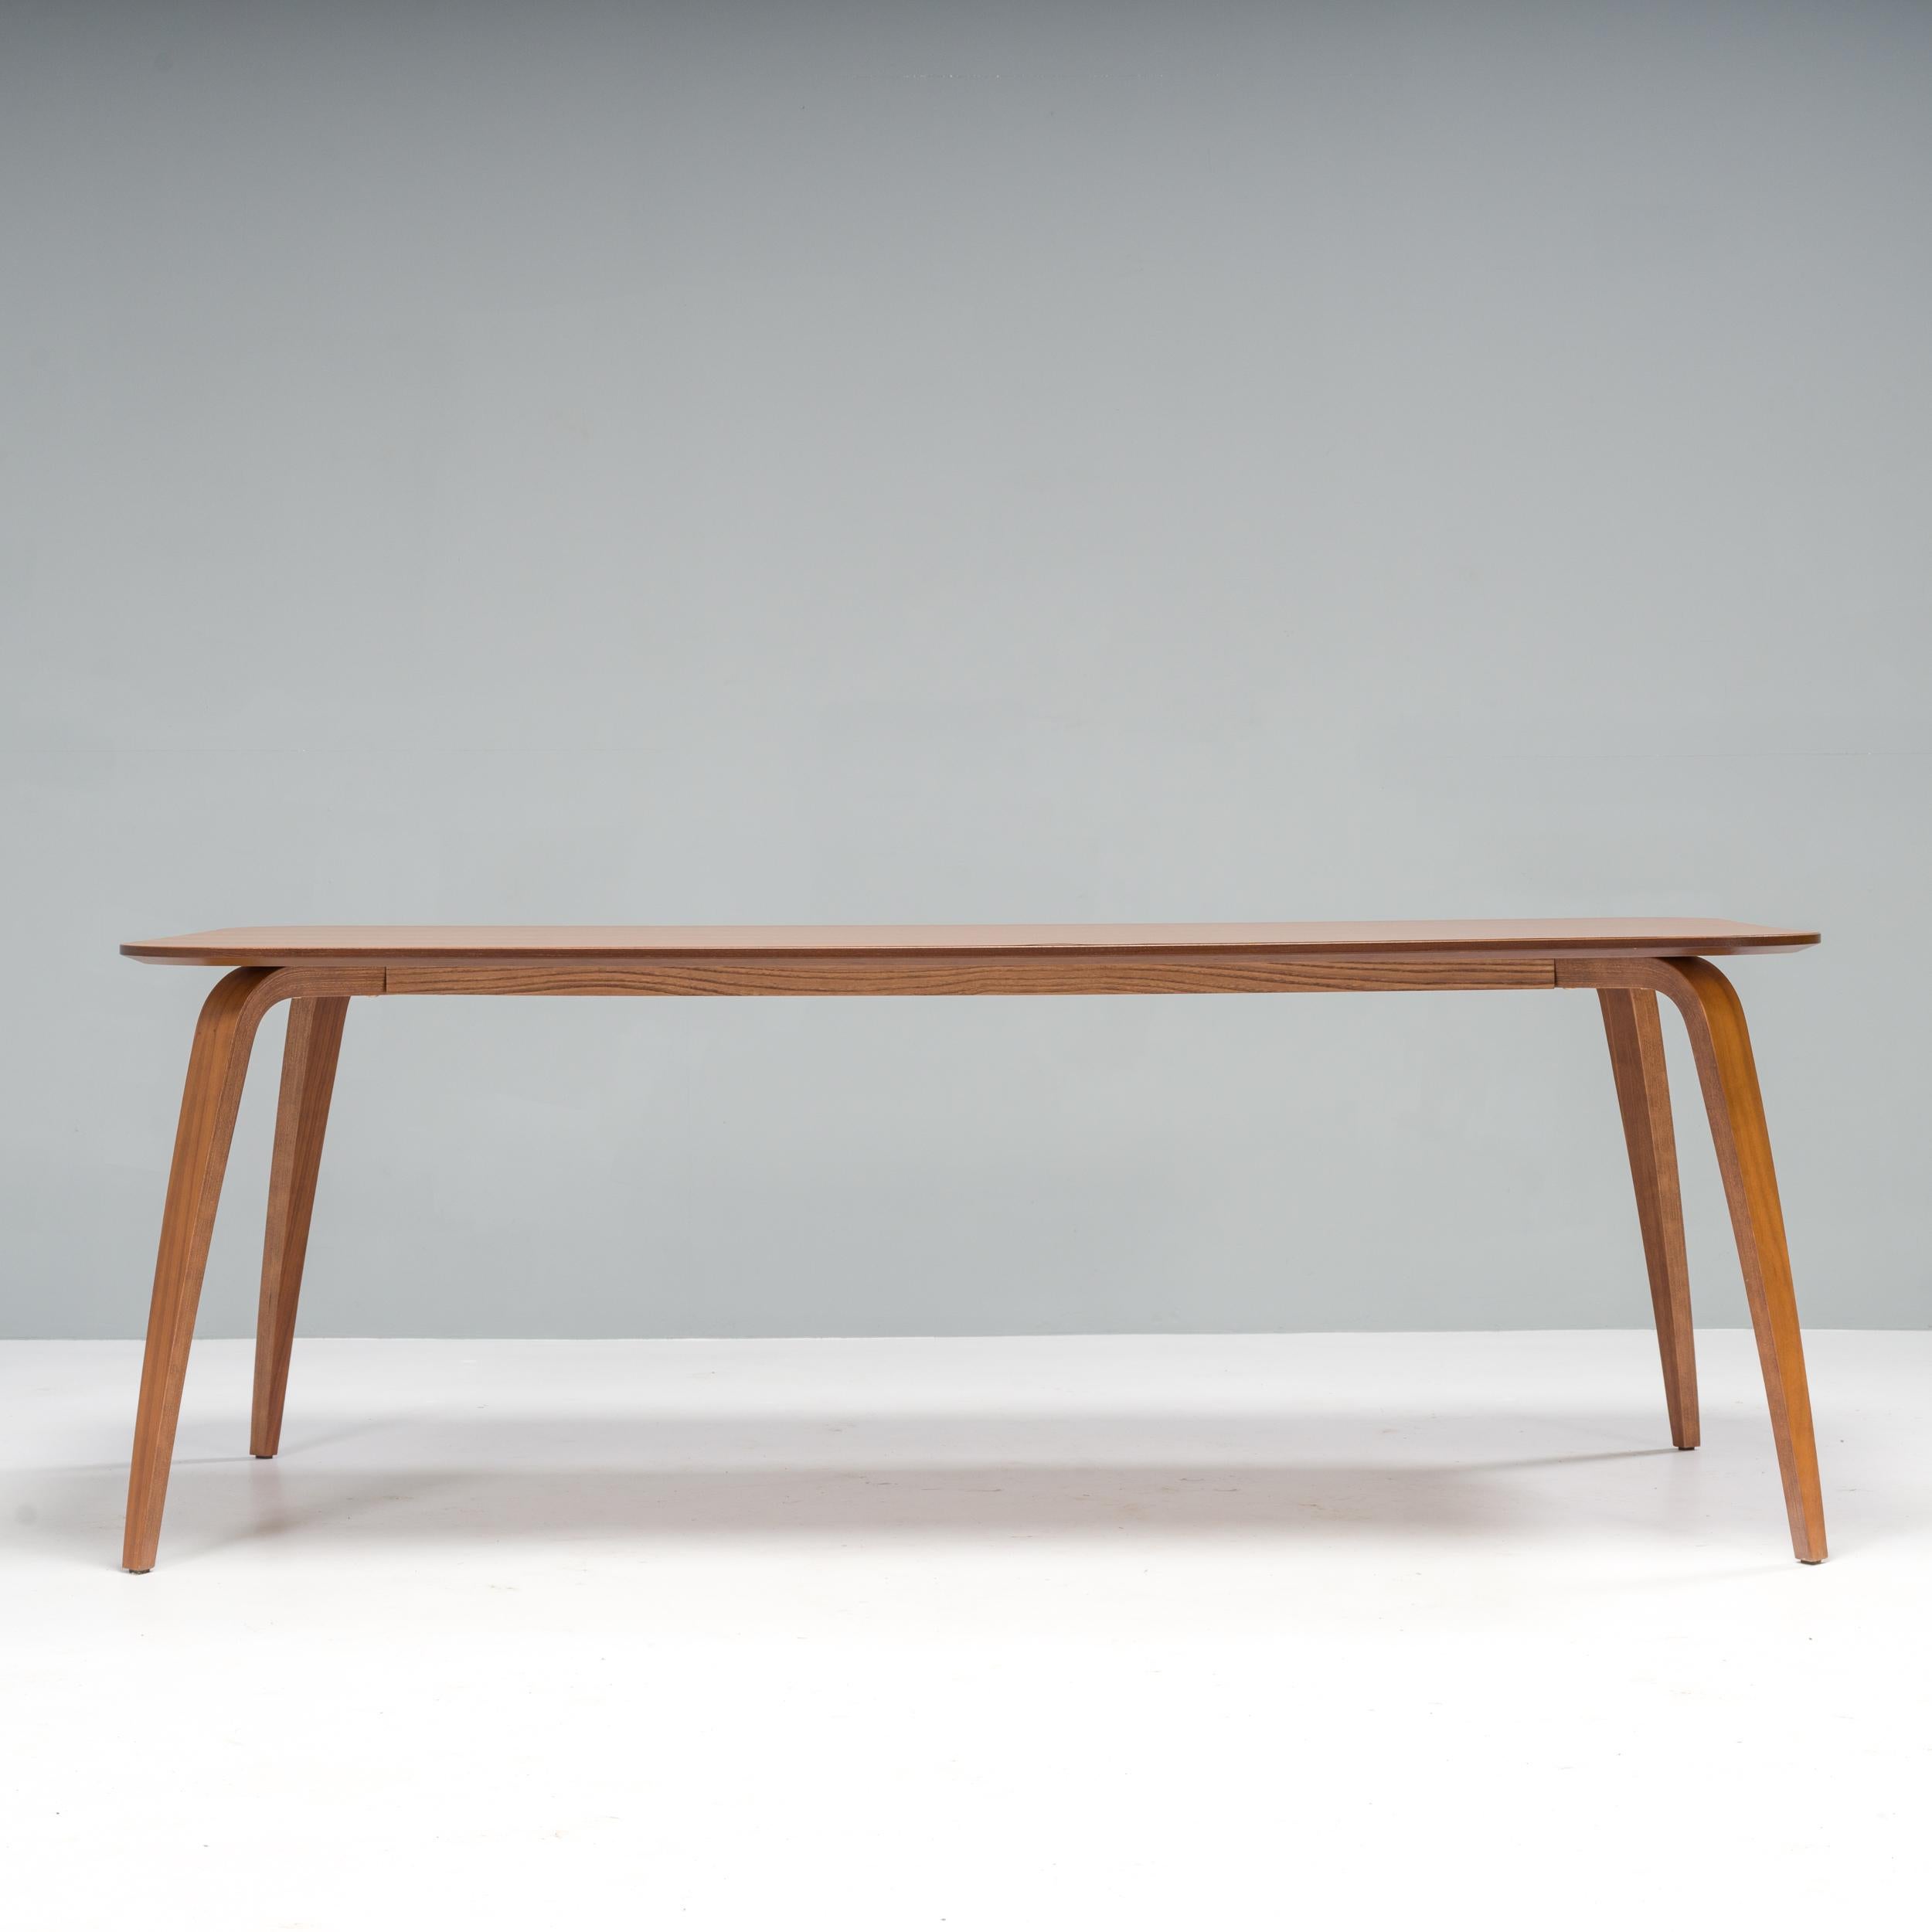 Originally designed in 2013 by Komplot Design for Gubi, the rectangular dining table is a truly classic piece.

Constructed from American walnut, the table features a large rectangular table top with softly rounded corners.

The curves of the design